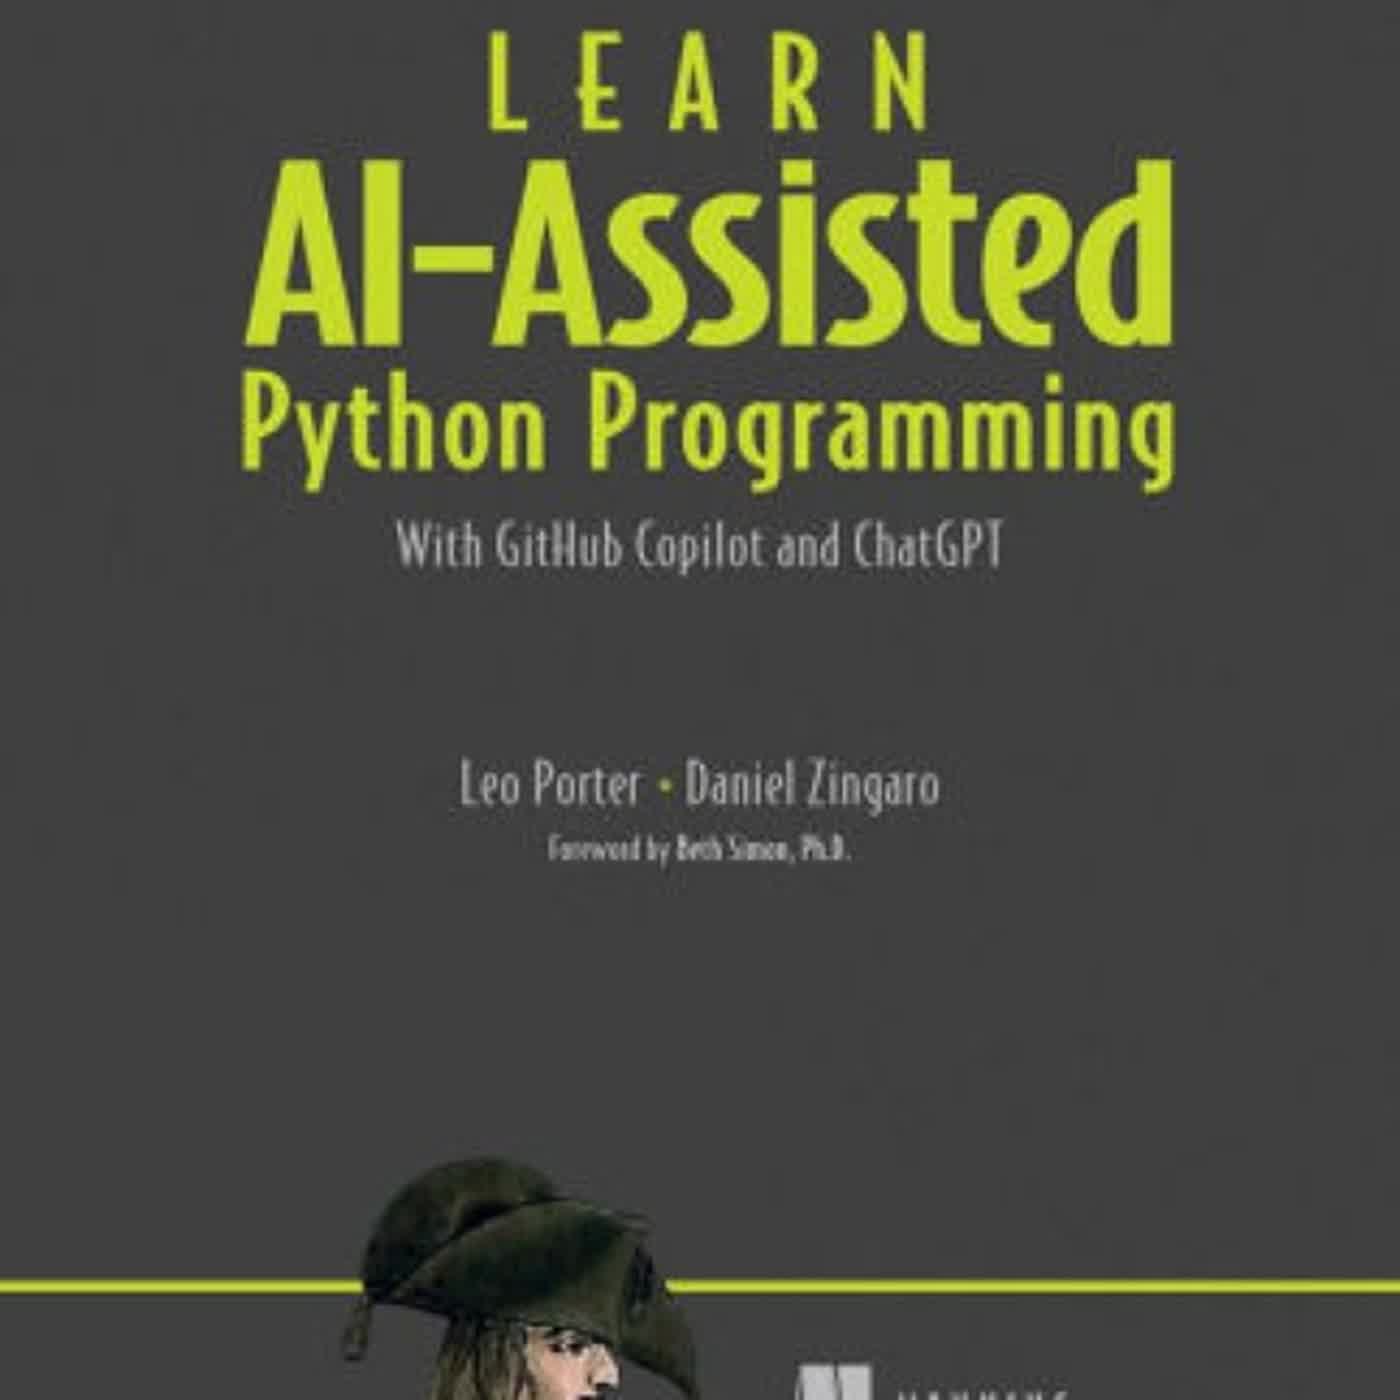 [download pdf] Learn AI-assisted Python Programming: With GitHub Copilot and ChatGPT by Leo Porter, Daniel Zingaro